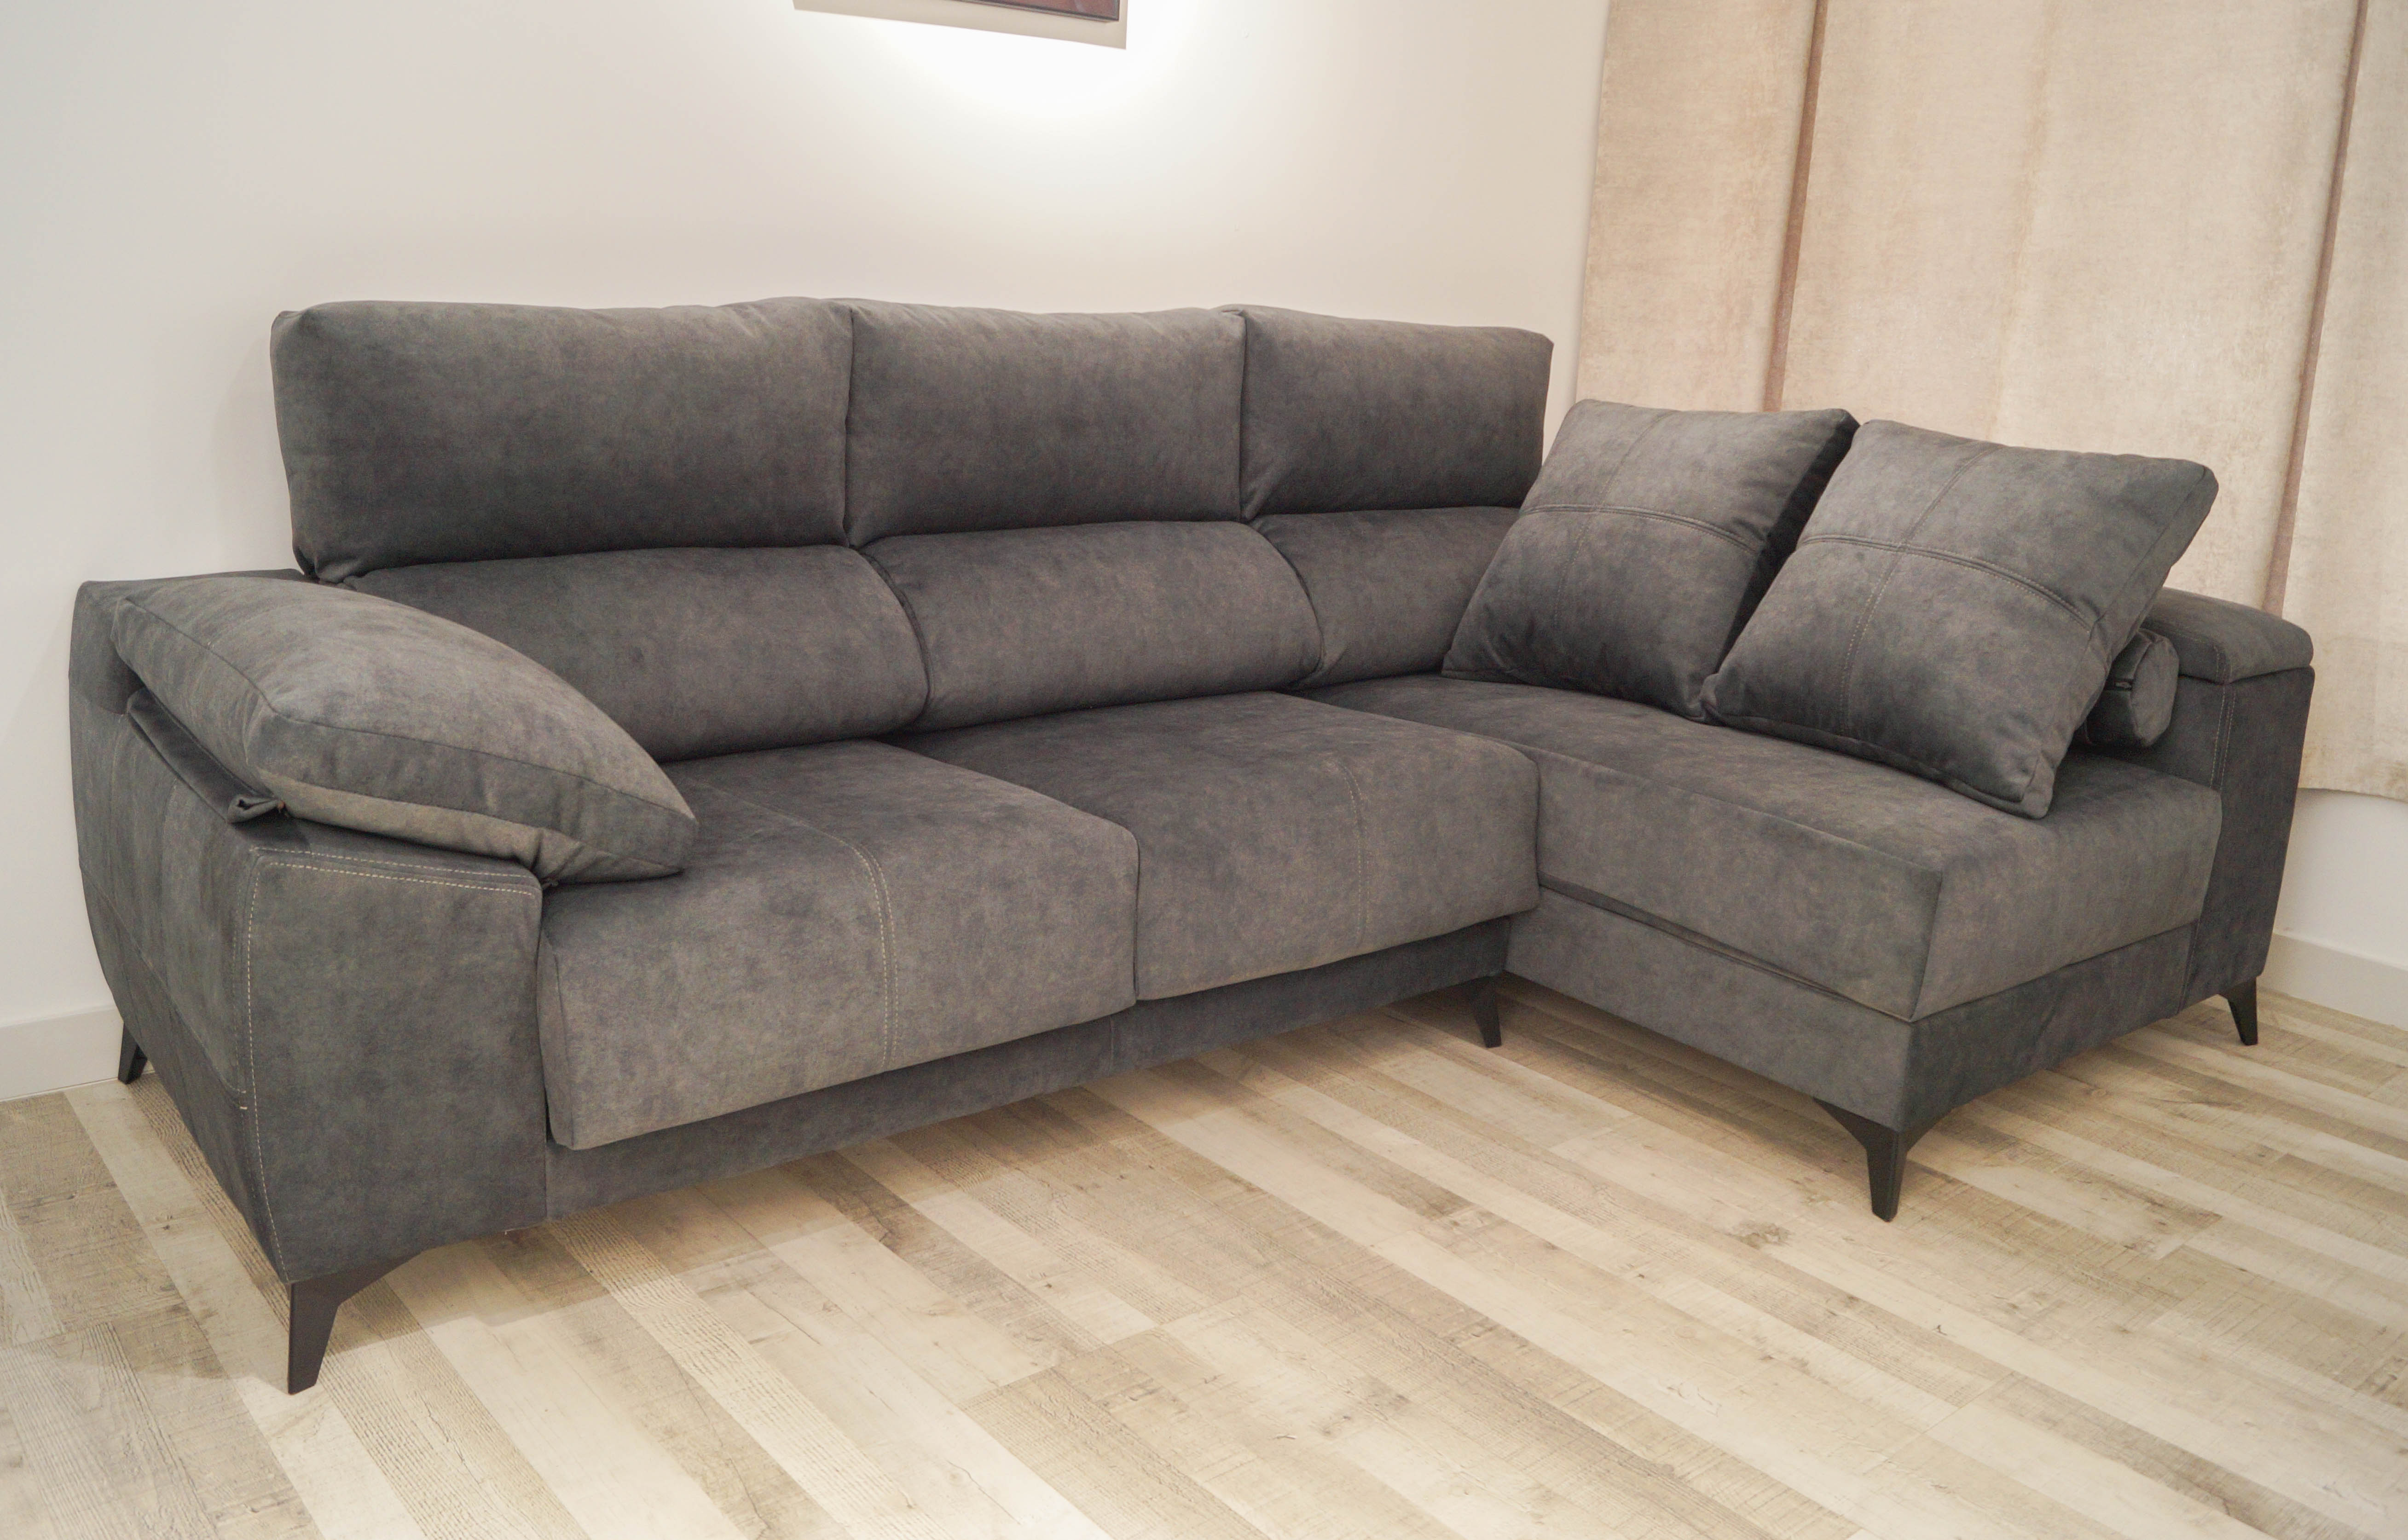 Chaise longue sofa with short arm chest, sliding seats with Paris reclining heads.